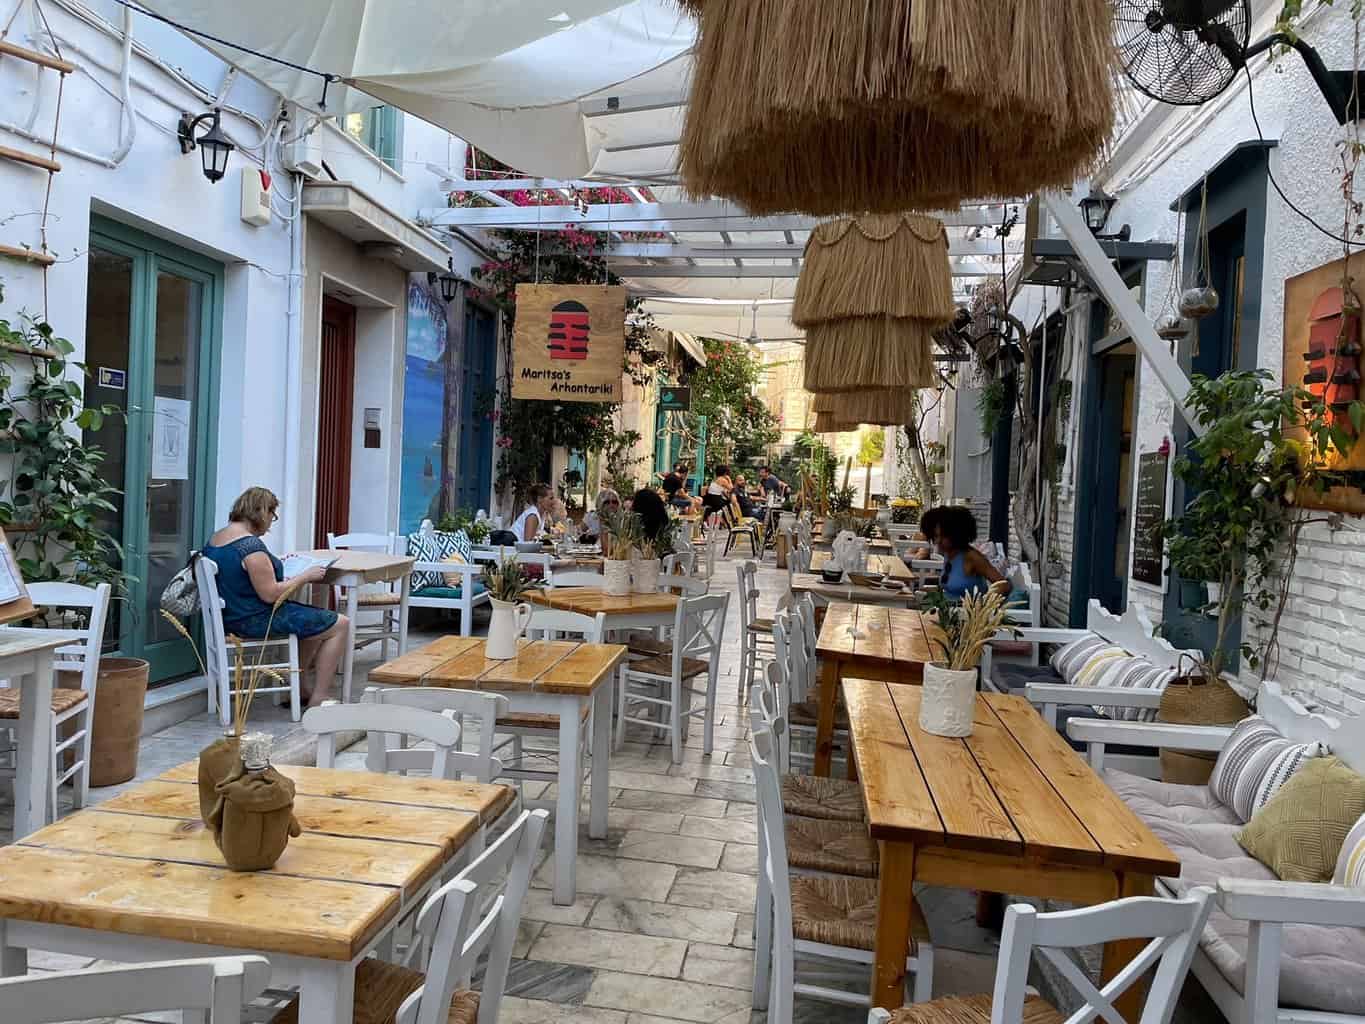 Many of the best restaurants in Syros are in cute alleyways like this one throughout the main town of Ermoupolis.